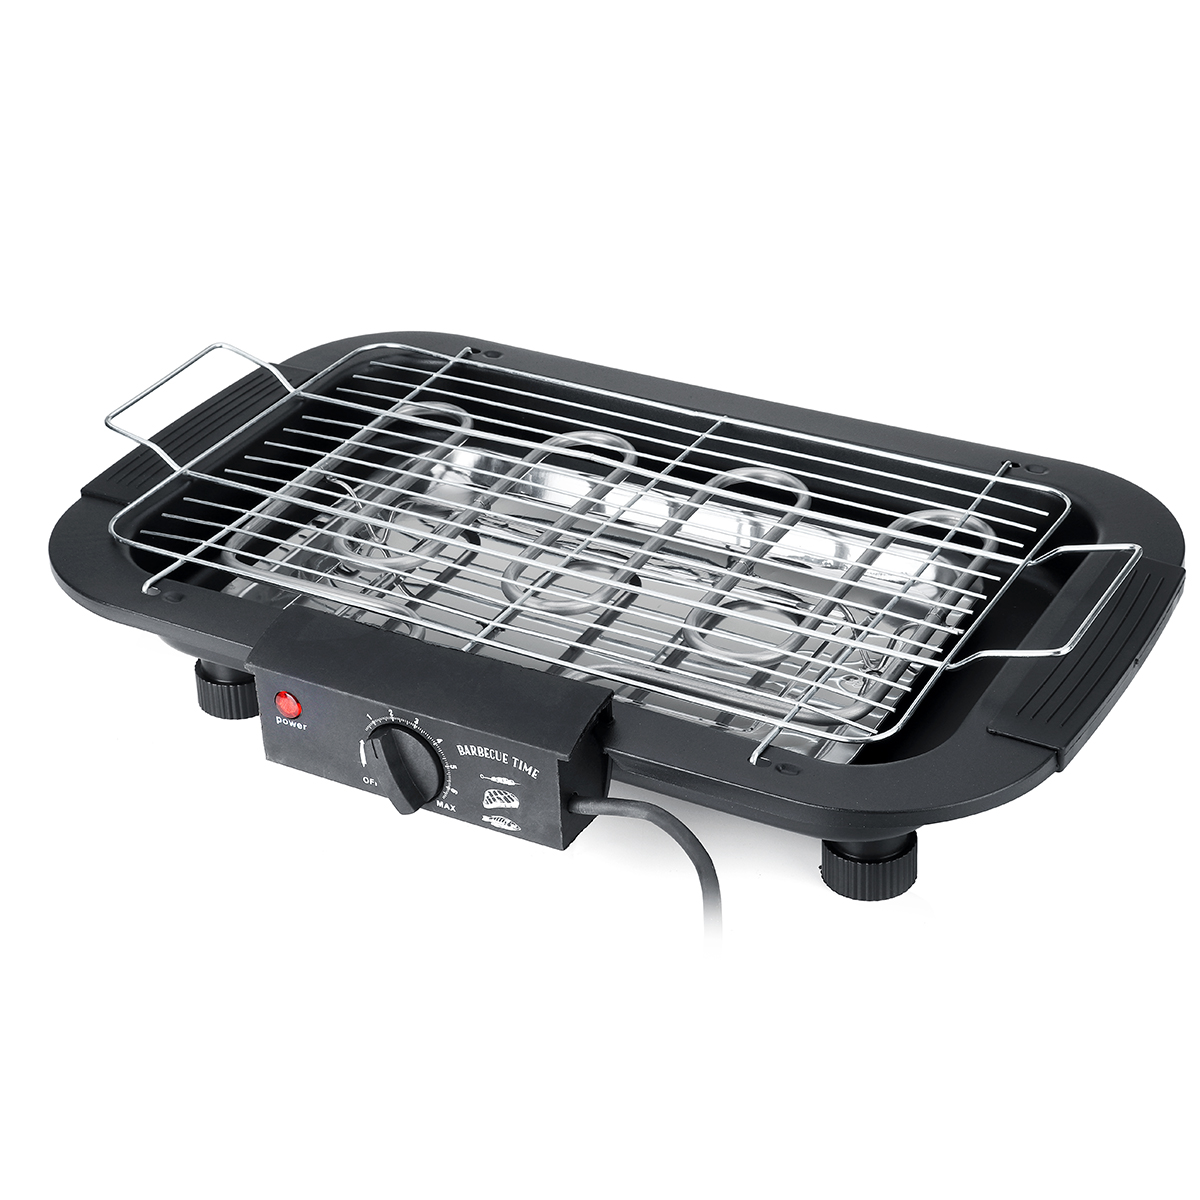 Portable 2000W Barbeque Grill For Cooking - Black